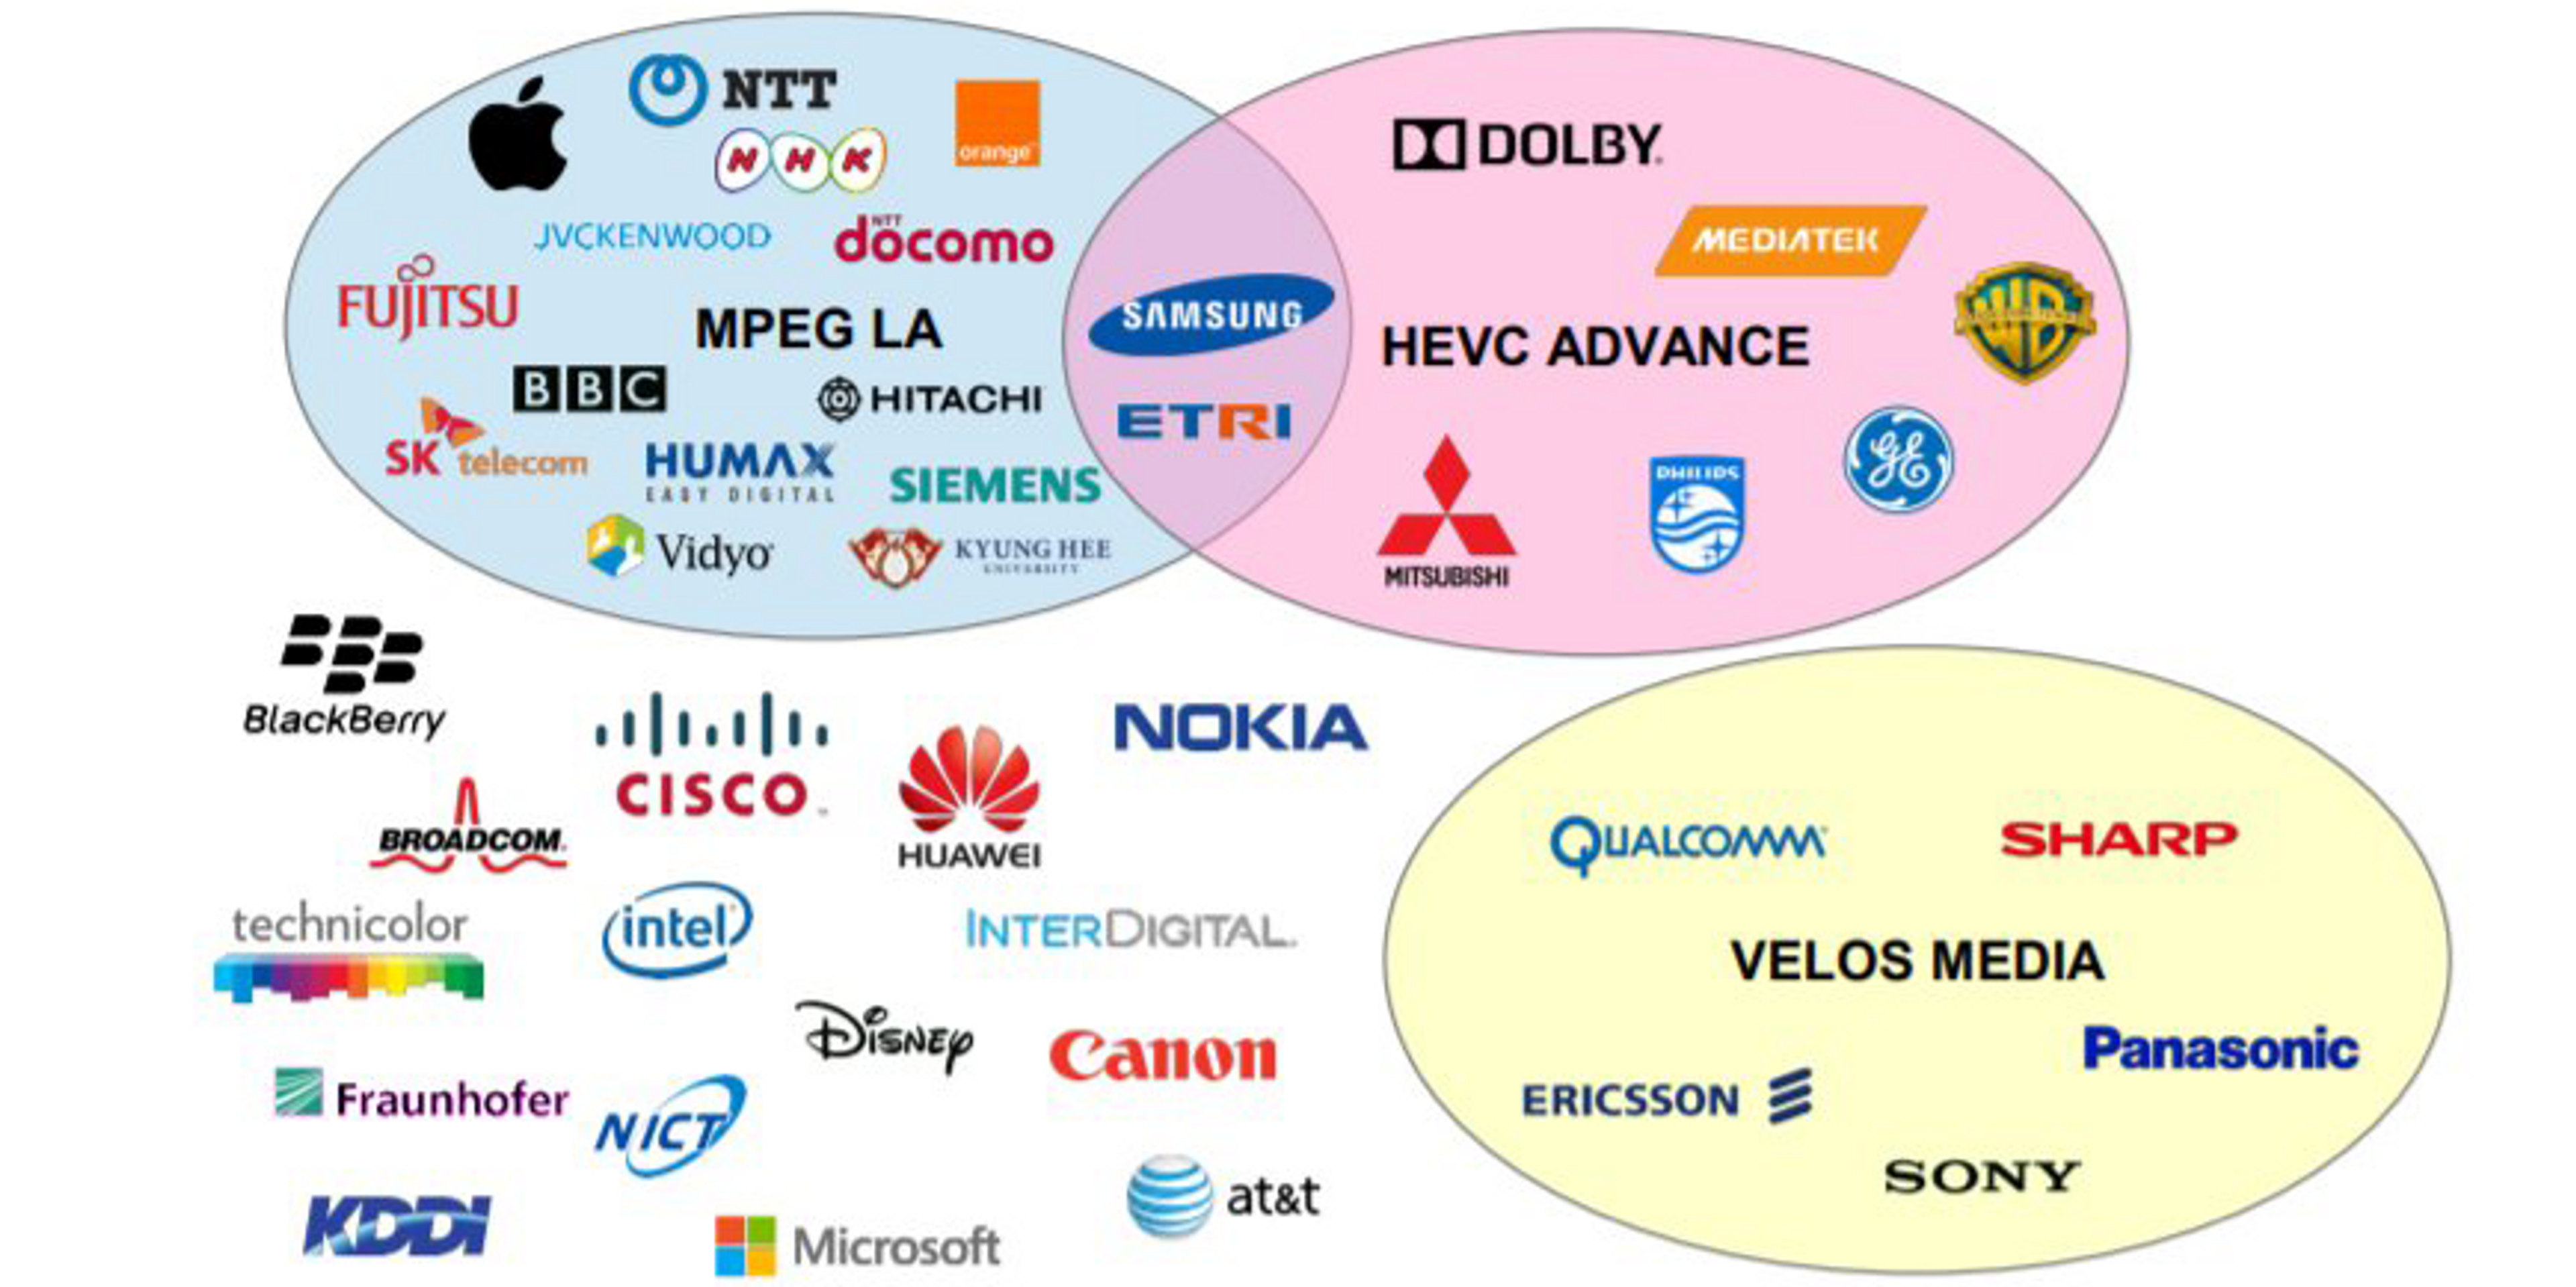 A Venn Diagram showing 3 major patent pools for HEVC, and many vendors outside of any pool.